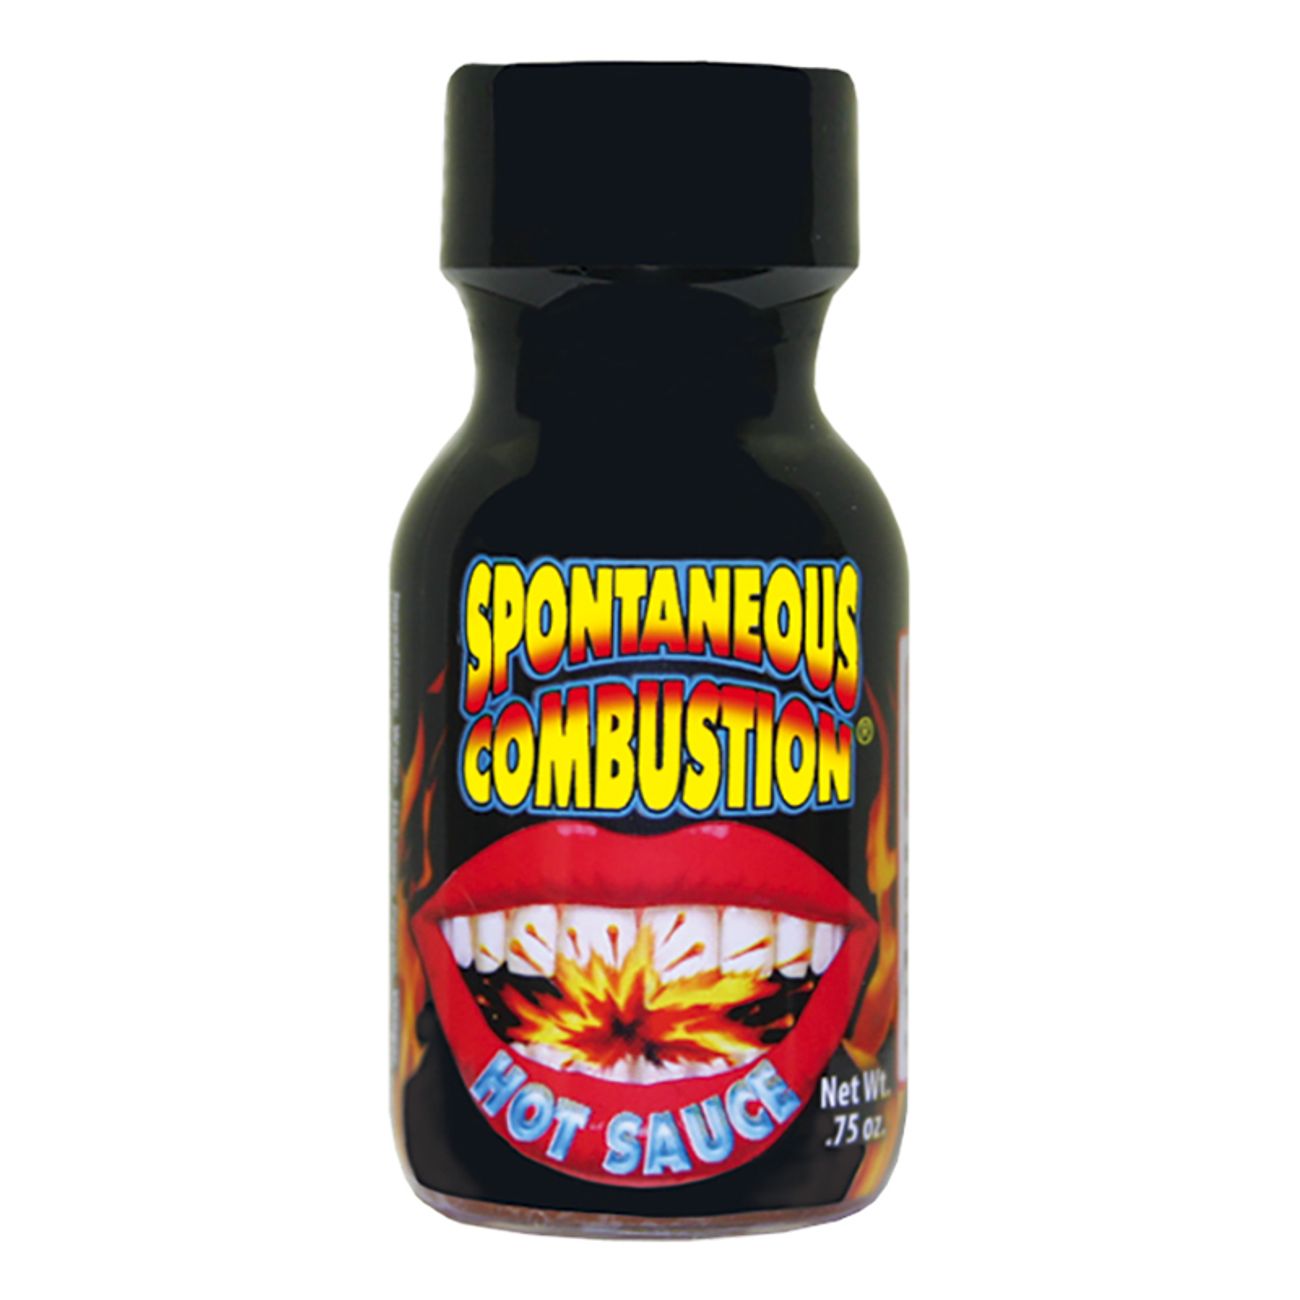 spontaneous-combustion-hot-sauce-1